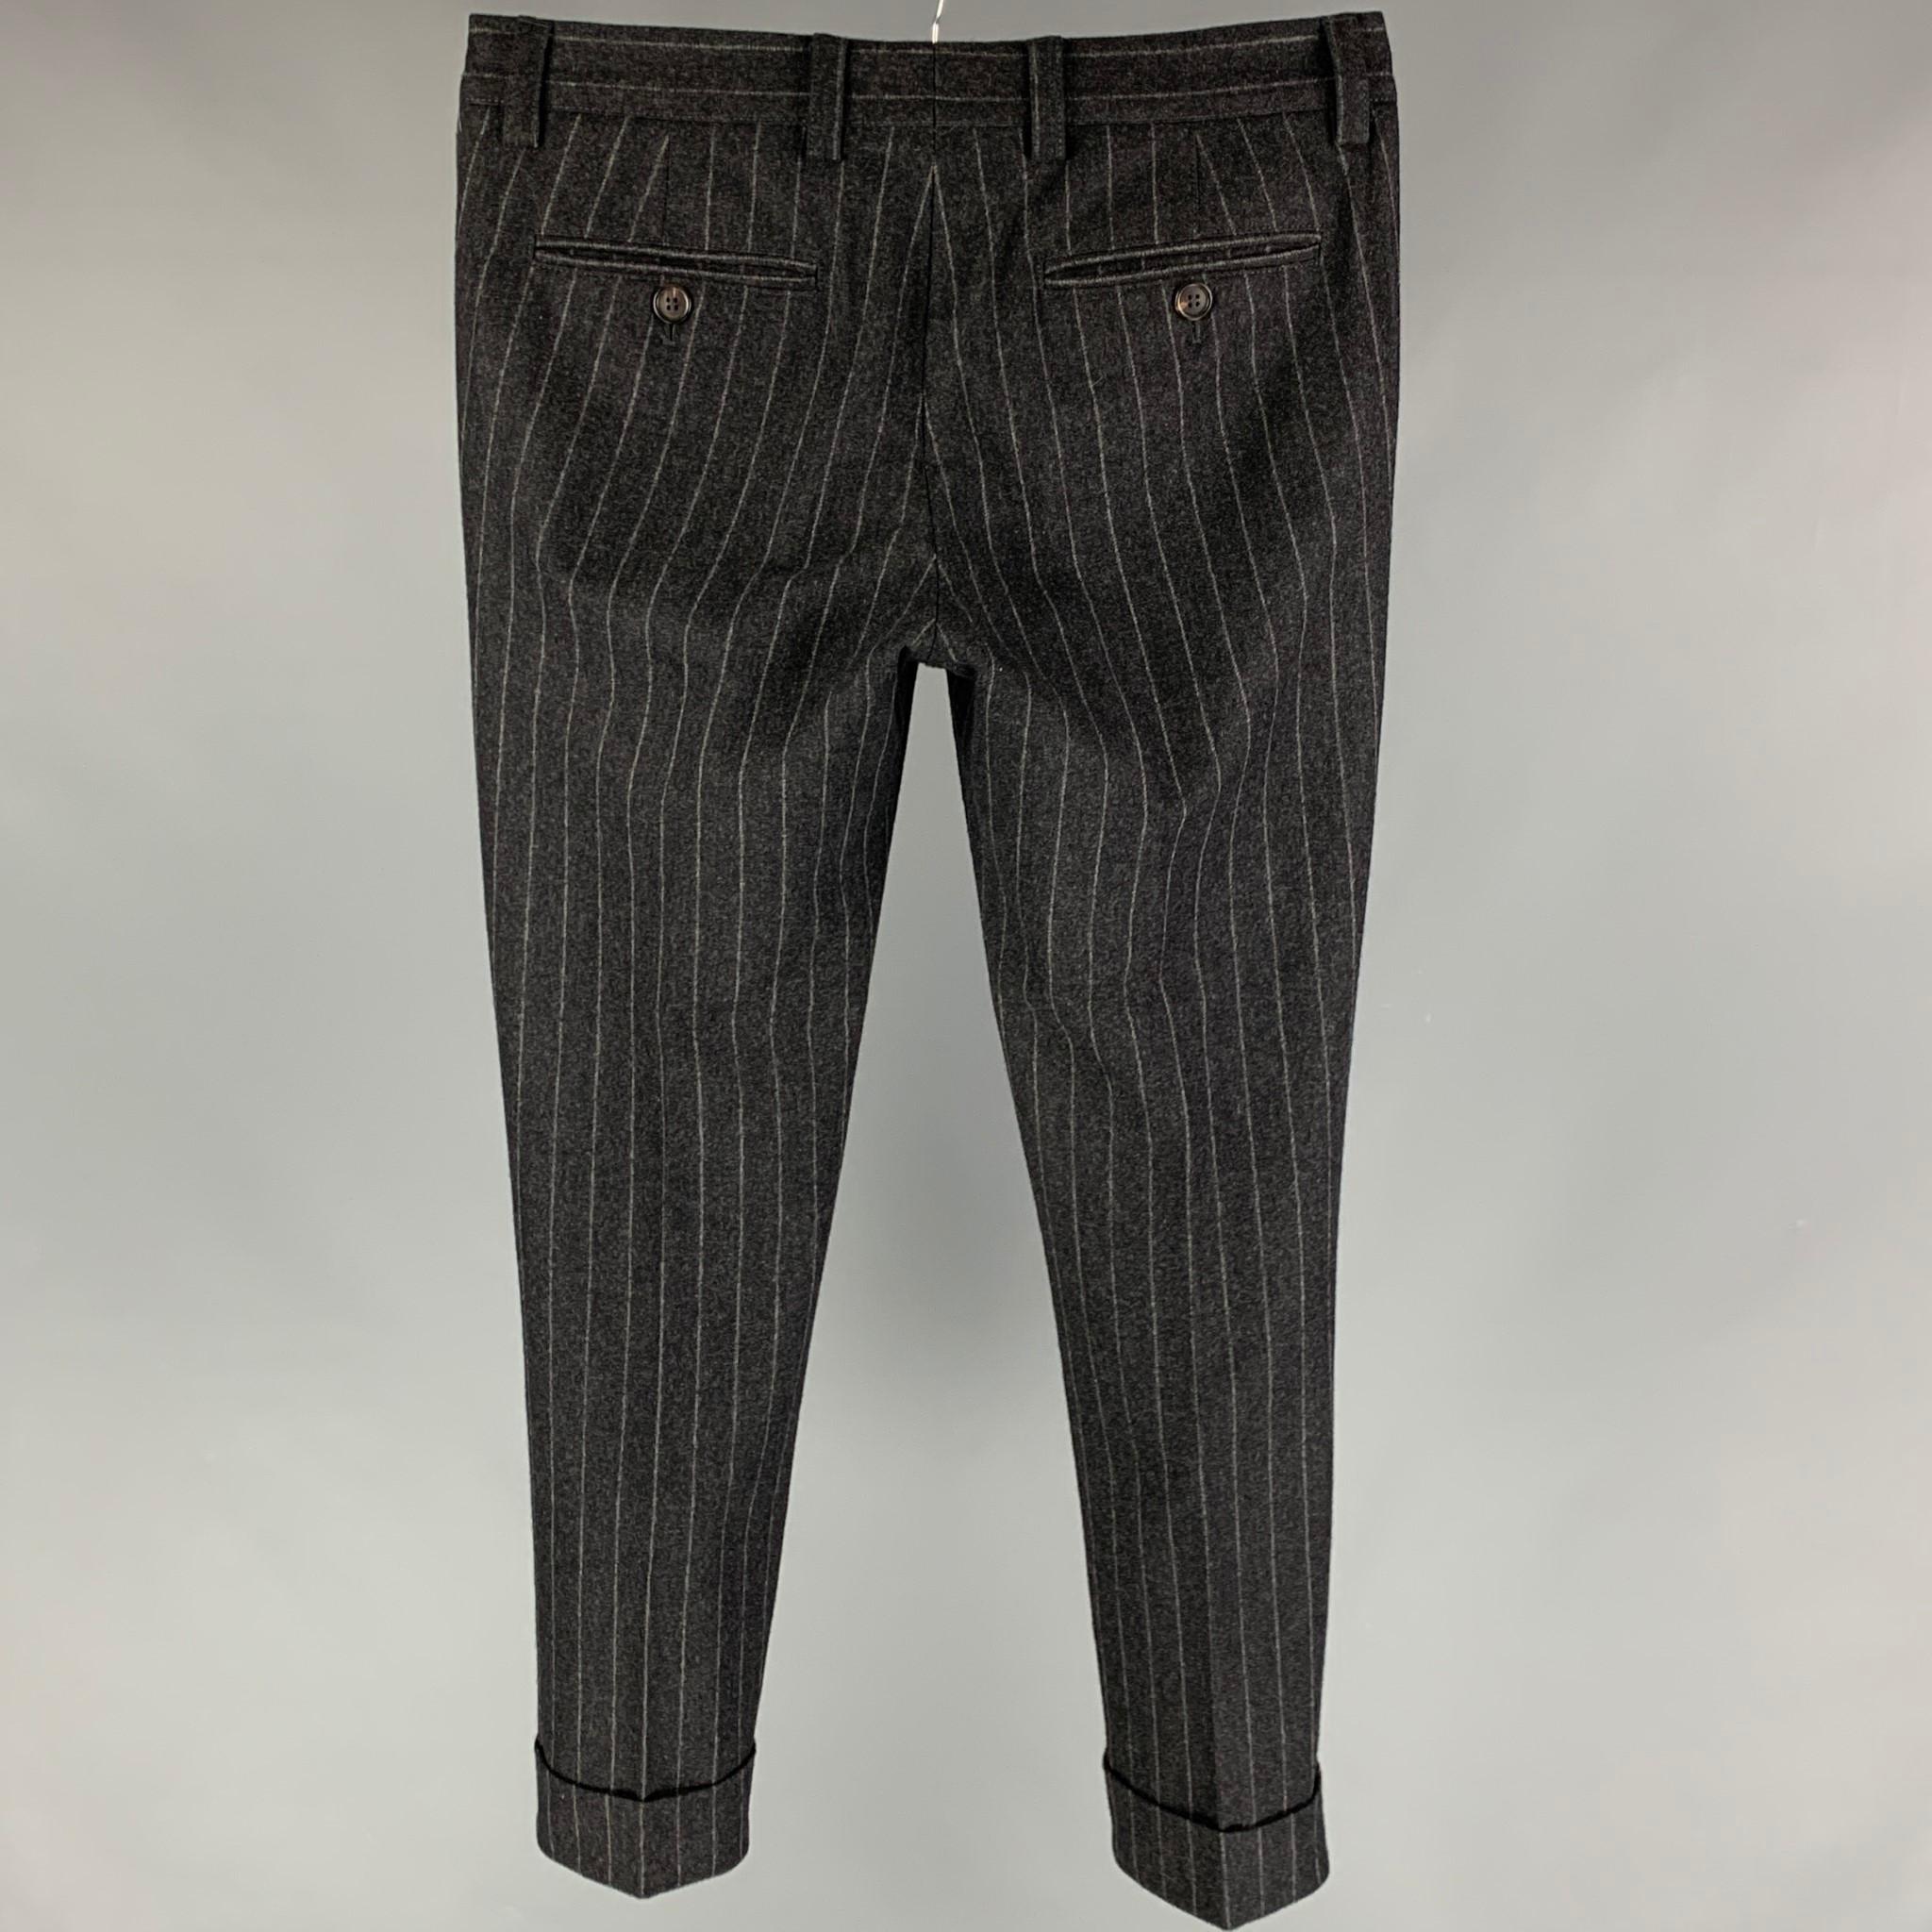 BRUNELLO CUCINELLI dress pants comes in a grey chalk stripe wool featuring a pleated style, cuffed leg, and a zip fly closure. Made in Italy. 

Very Good Pre-Owned Condition.
Marked: 48

Measurements:

Waist: 32 in.
Rise: 9 in.
Inseam: 30 in. 

